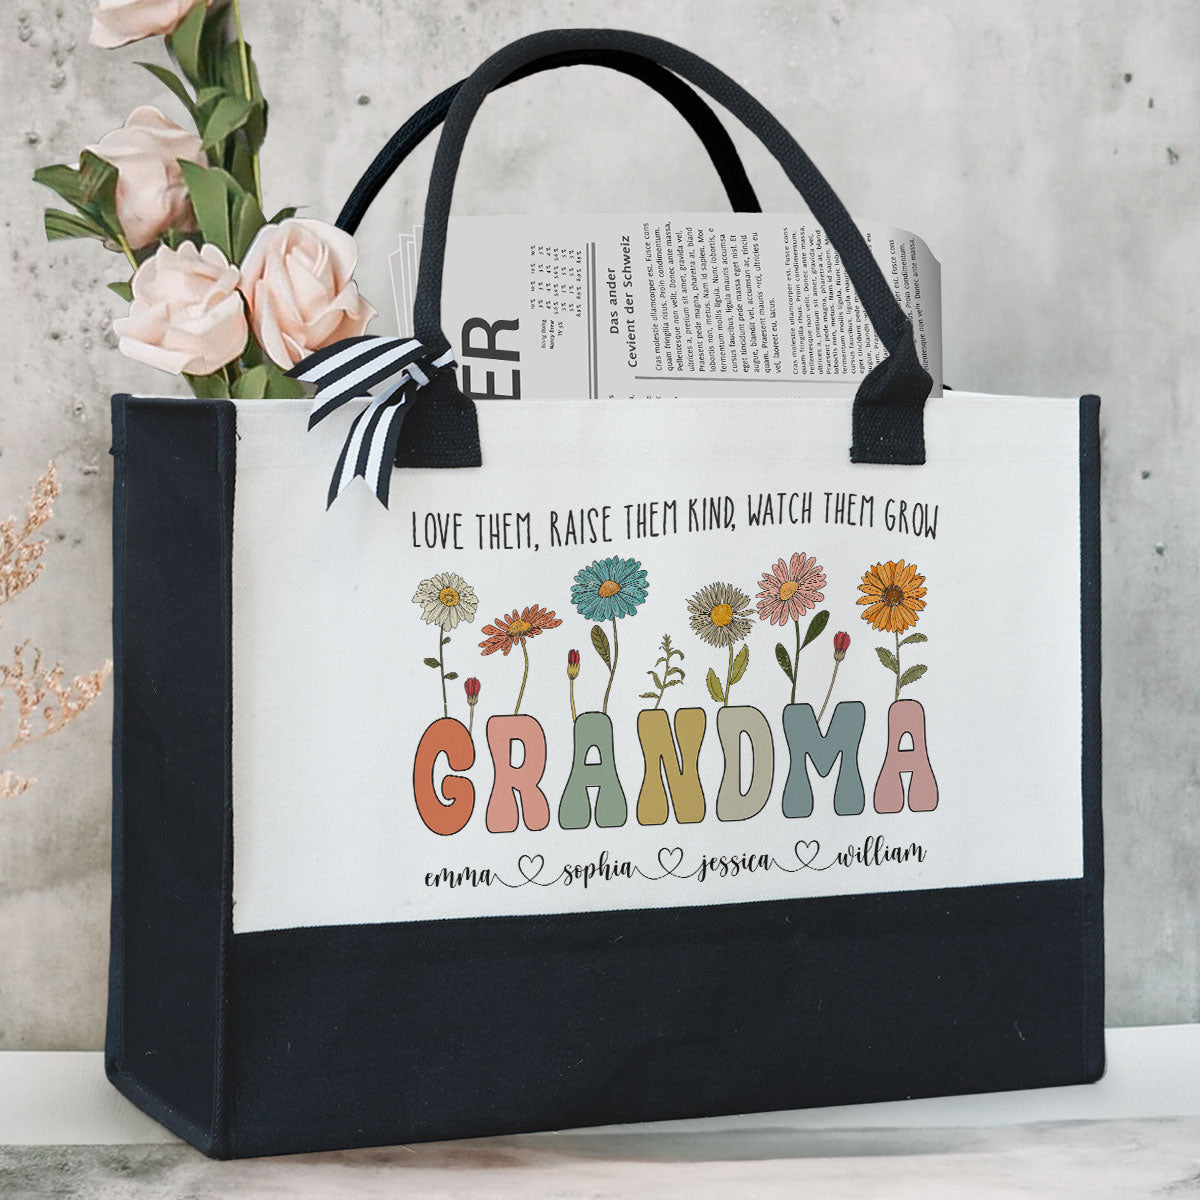 Custom Photo Tote Bag Photo Bag Gift for Family Picture 